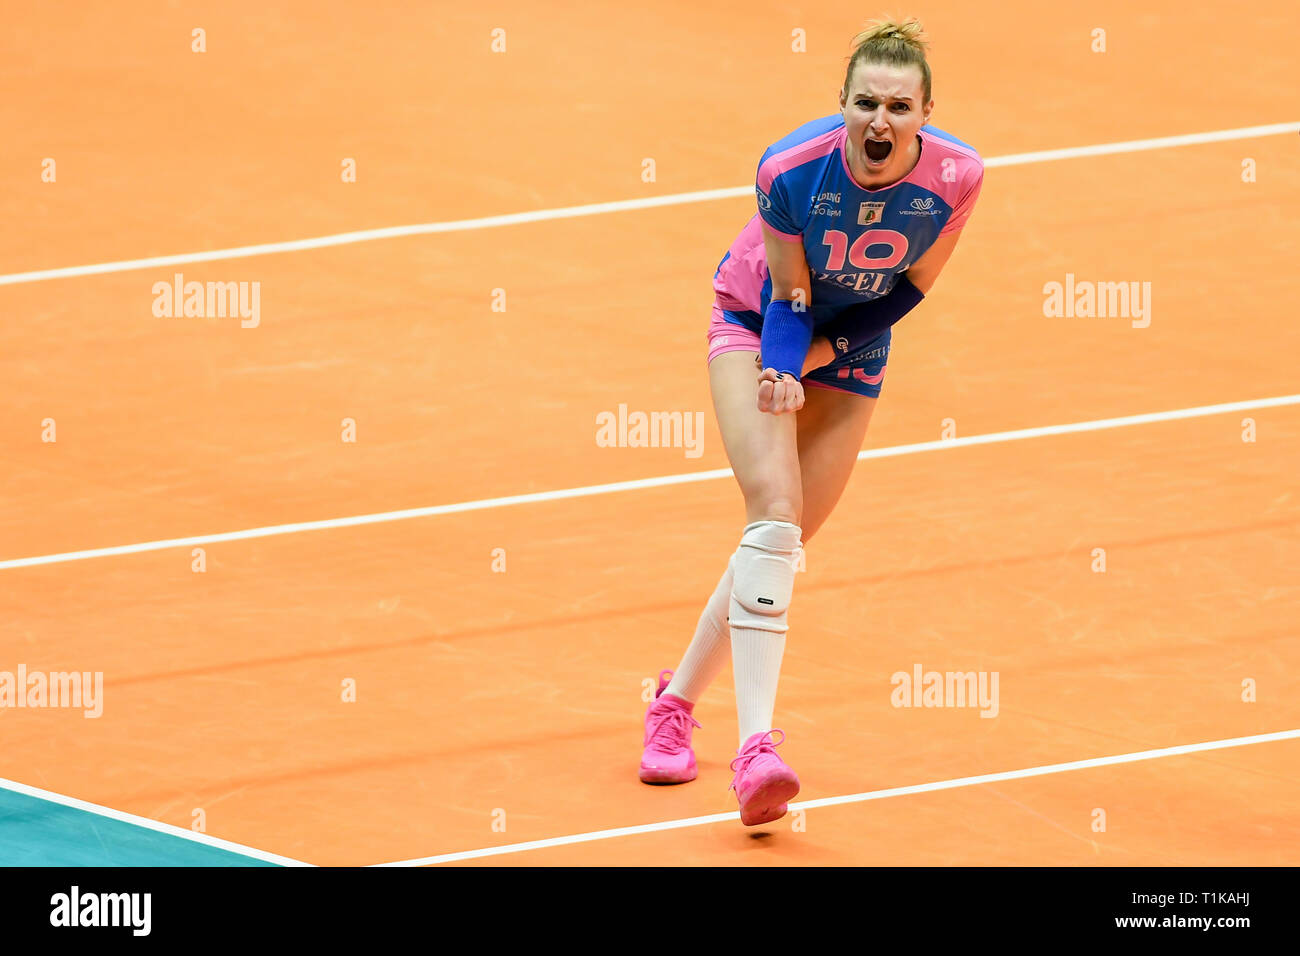 Candy Arena, Monza, Italy. 27th March, 2019. CEV Volleyball Challenge Cup women, Final, 2nd leg. Edina Begic of Saugella Monza exultation during the match between Saugella Monza and Aydin BBSK at the Candy Arena Italy.  Credit: Claudio Grassi/Alamy Live News Stock Photo